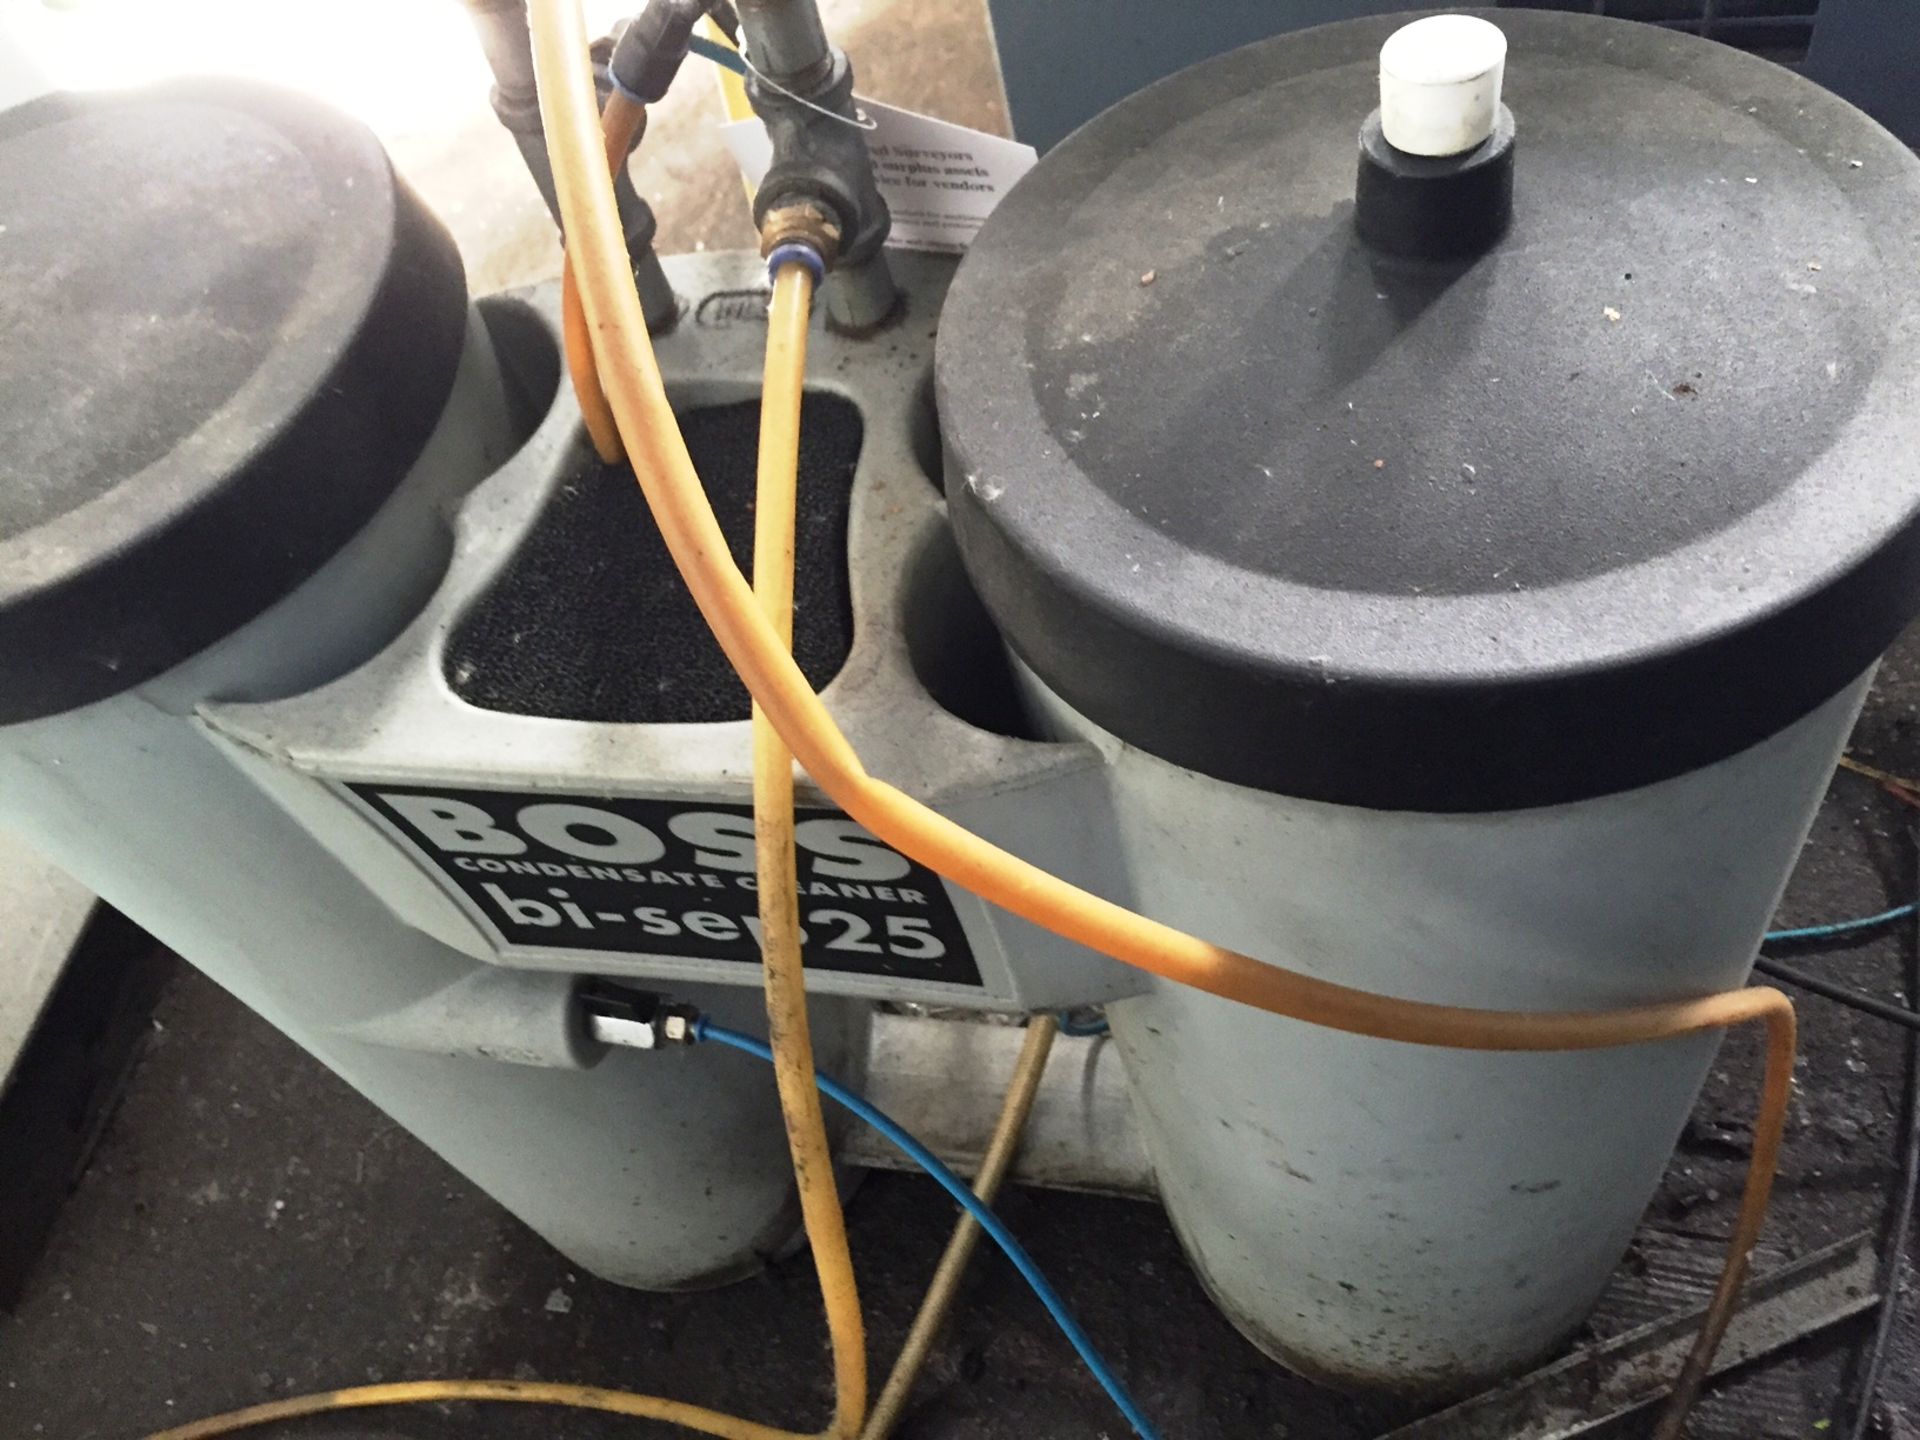 Boss condensate cleaner